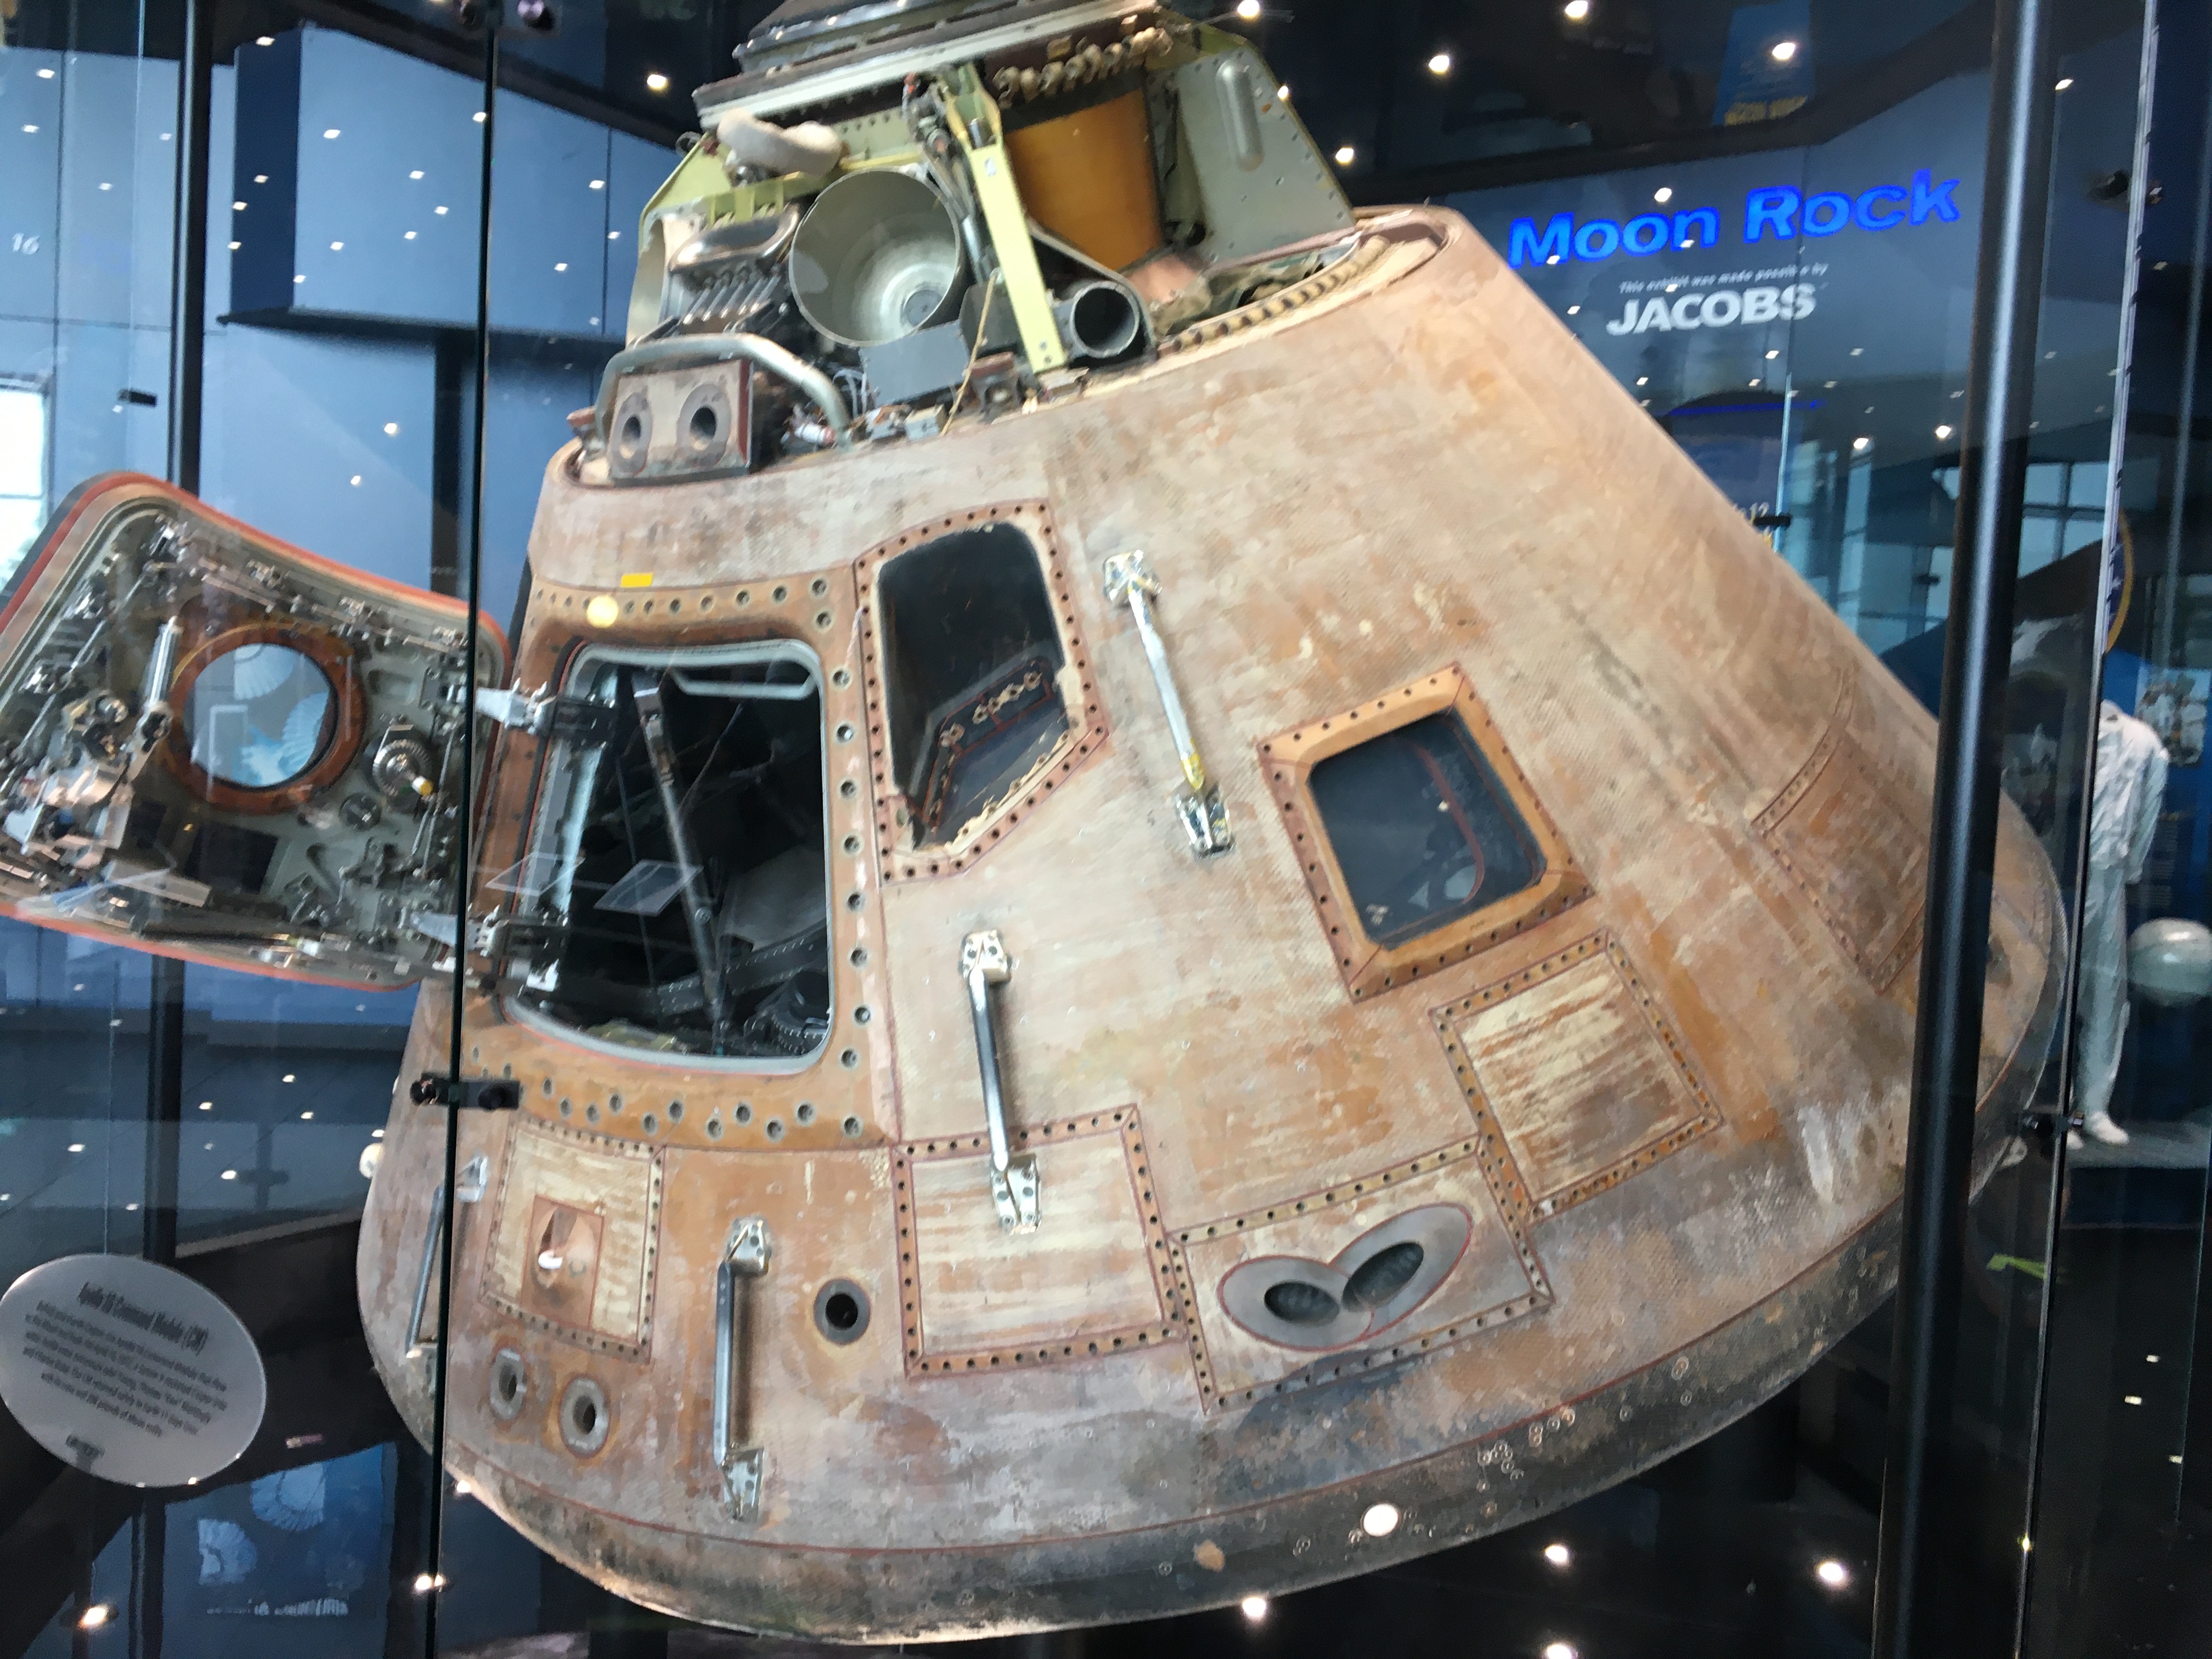 U.S. Space & Rocket Center: 9 cool things to see/do there right now - al.com